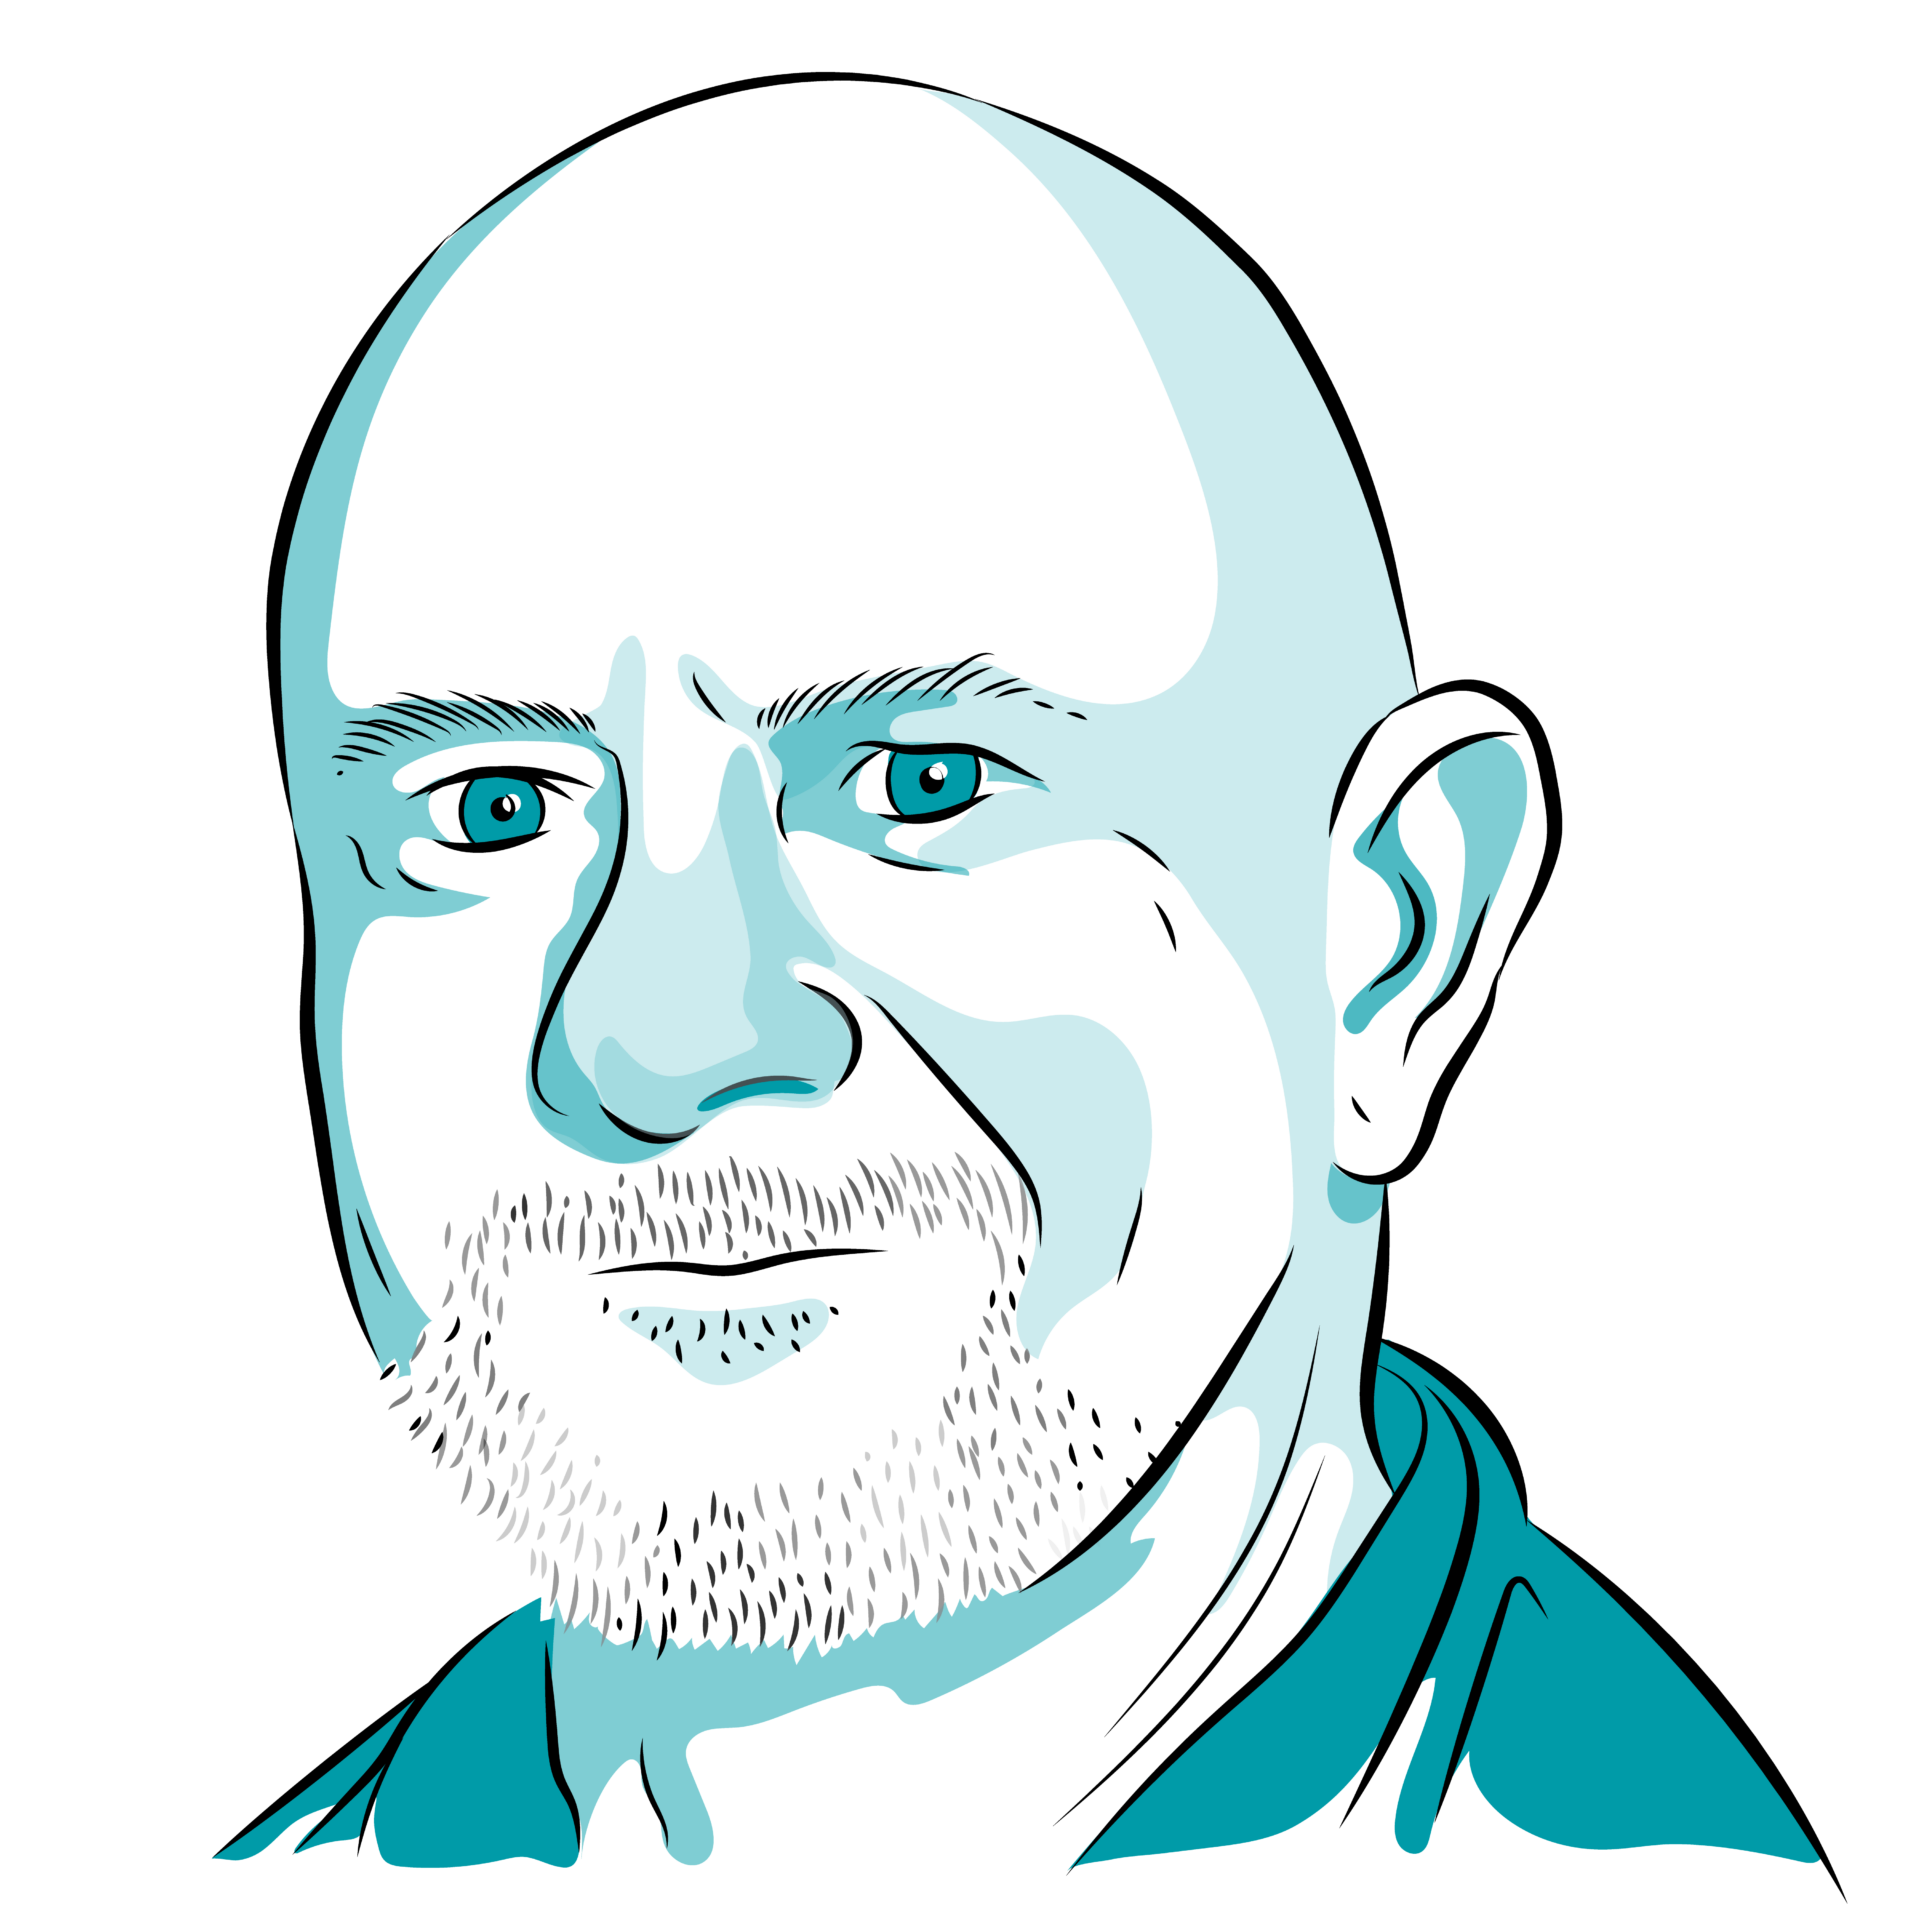 A portrait of Nick Hornby